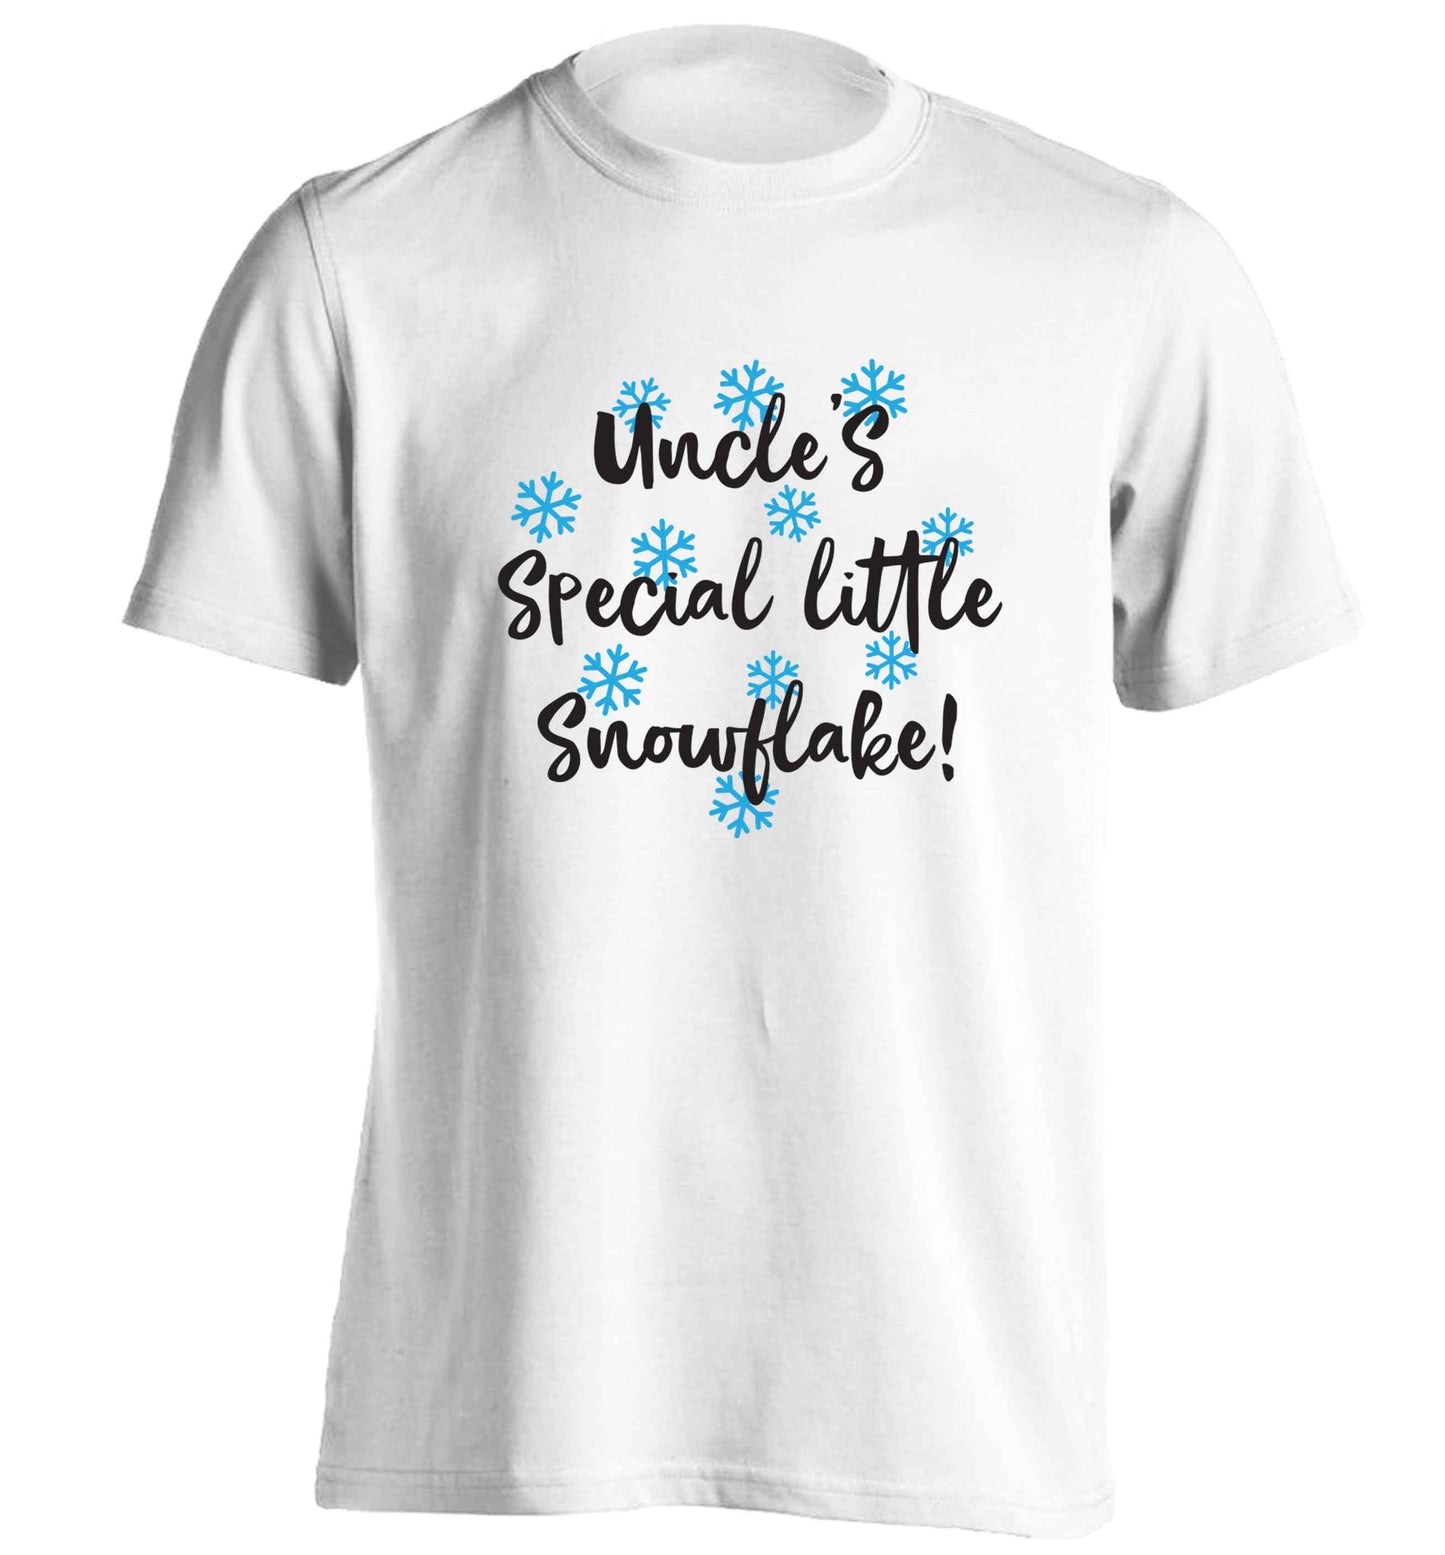 Uncle's special little snowflake adults unisex white Tshirt 2XL